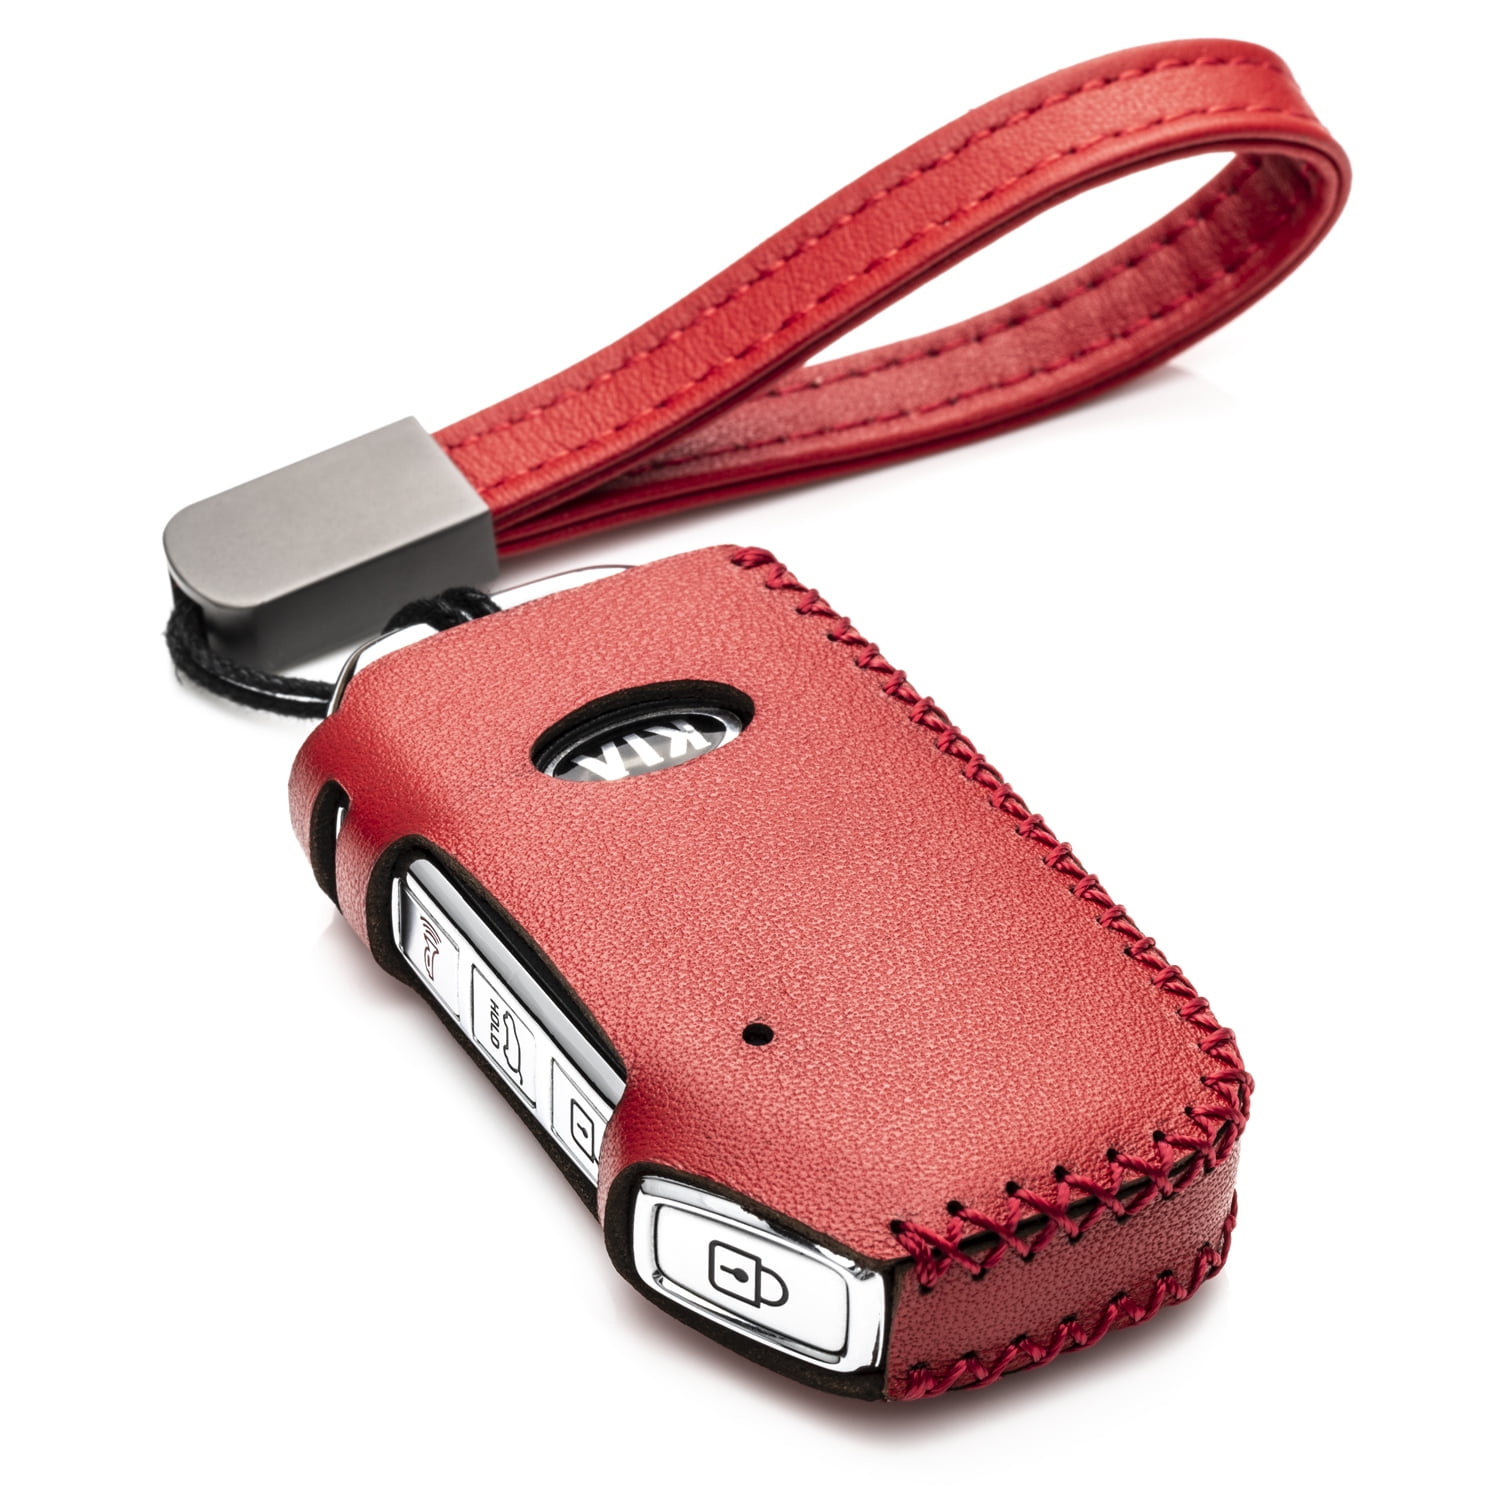 Vitodeco Genuine Leather Smart Key Fob Case Cover Protector